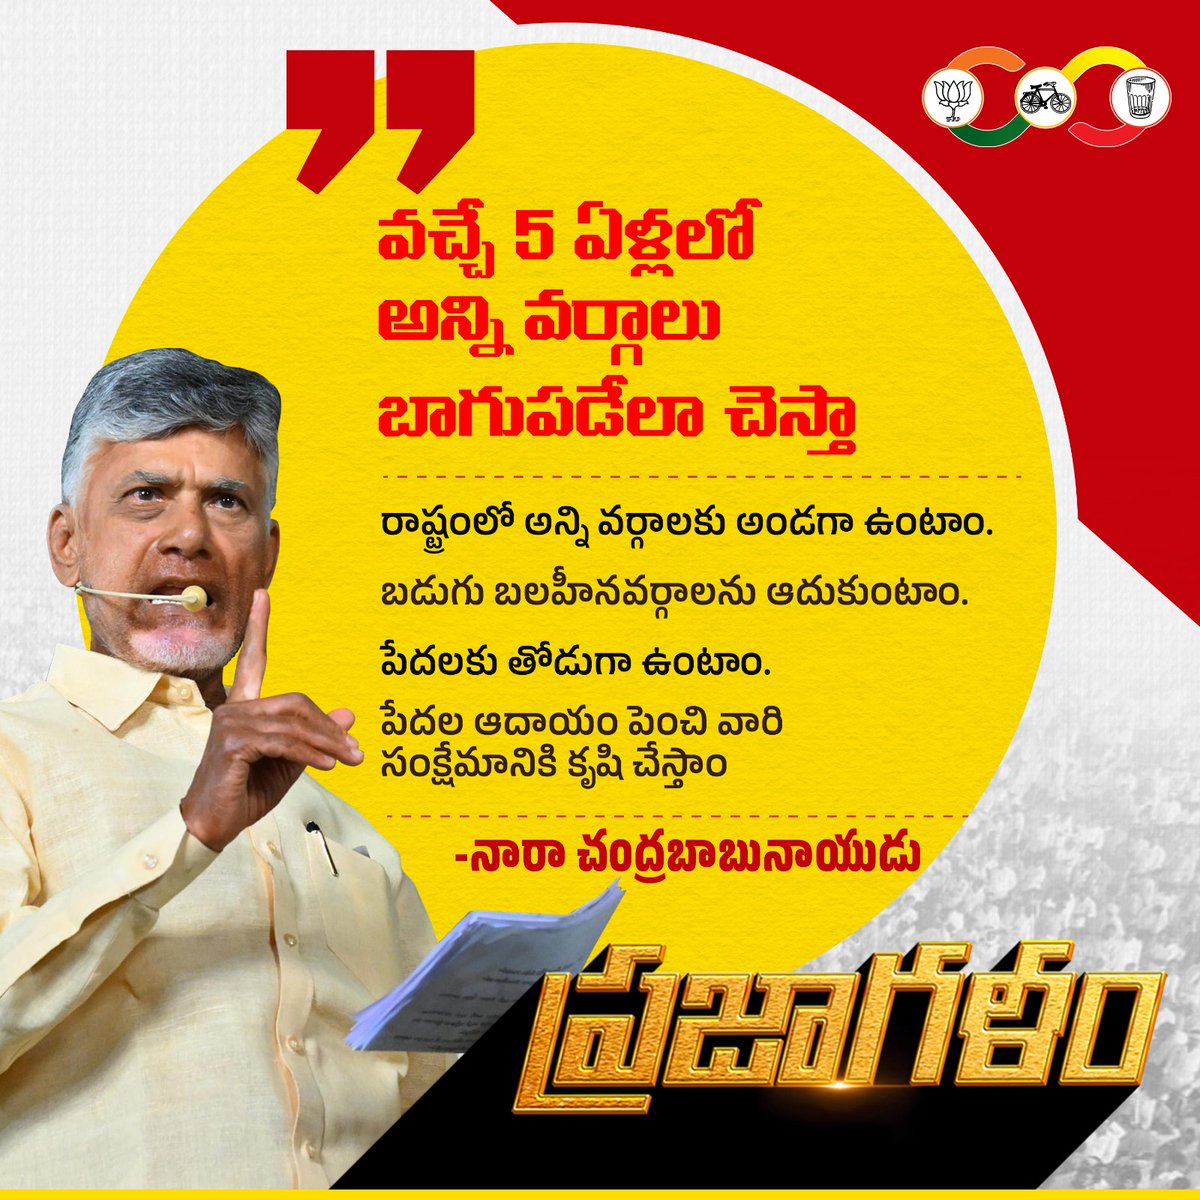 AP has become a state without a capital. YCP administration is corrupt no matter what - Jagan
took AP to the top in debt. #BabuForJanaRajyam